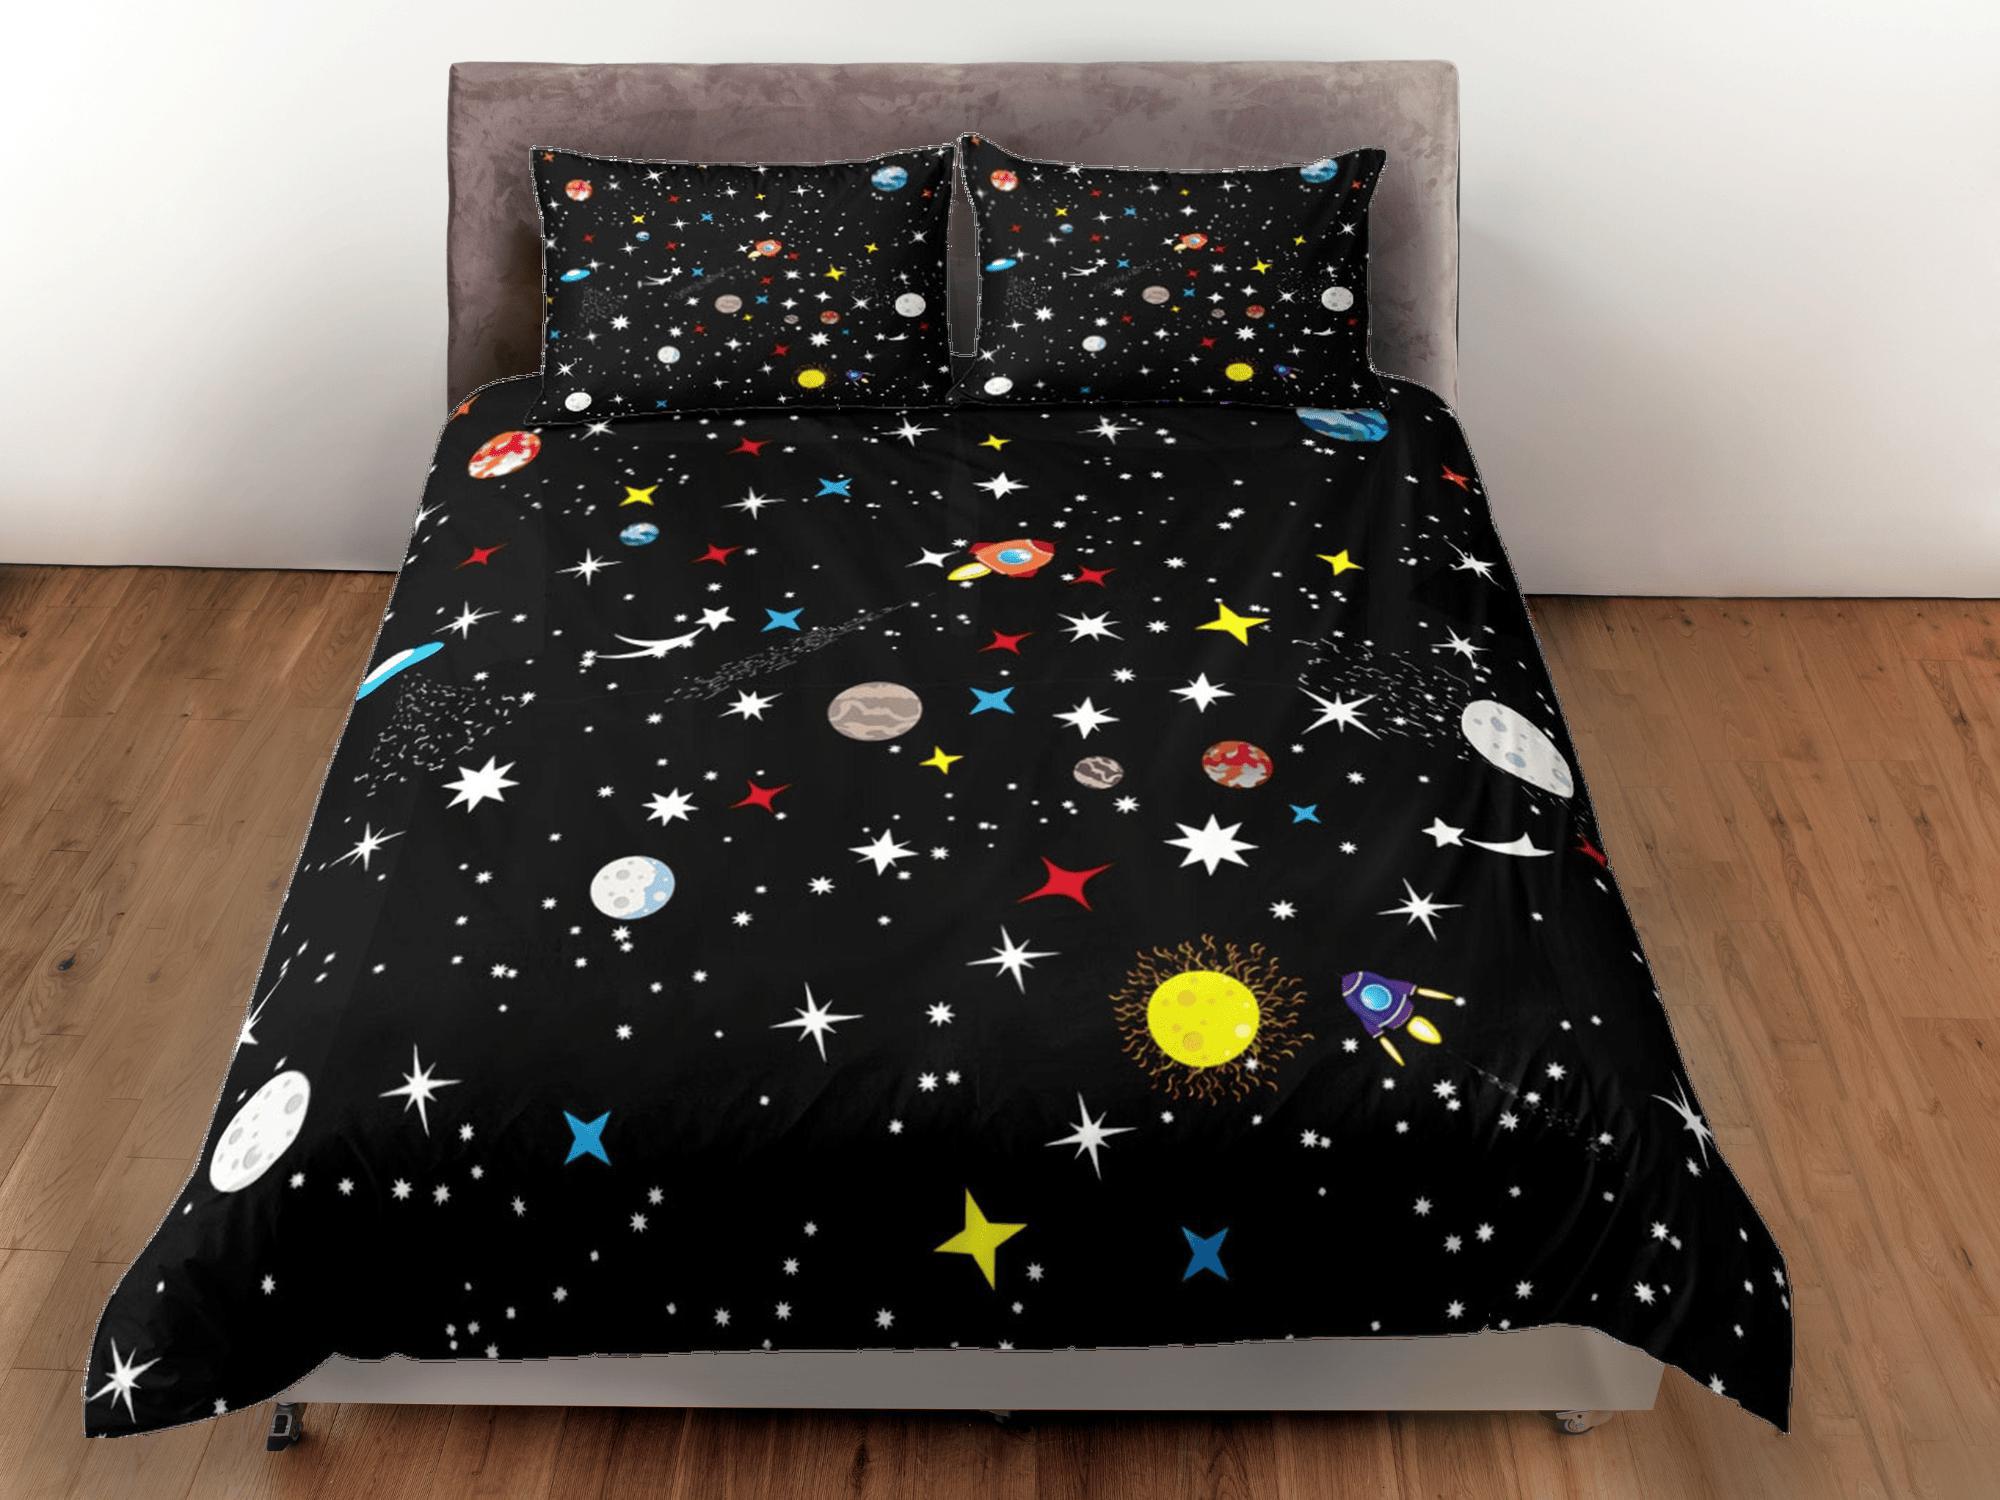 daintyduvet Planets Galaxy Black Duvet Cover Set Bedspread, Teens Kids Bedding with Pillowcase